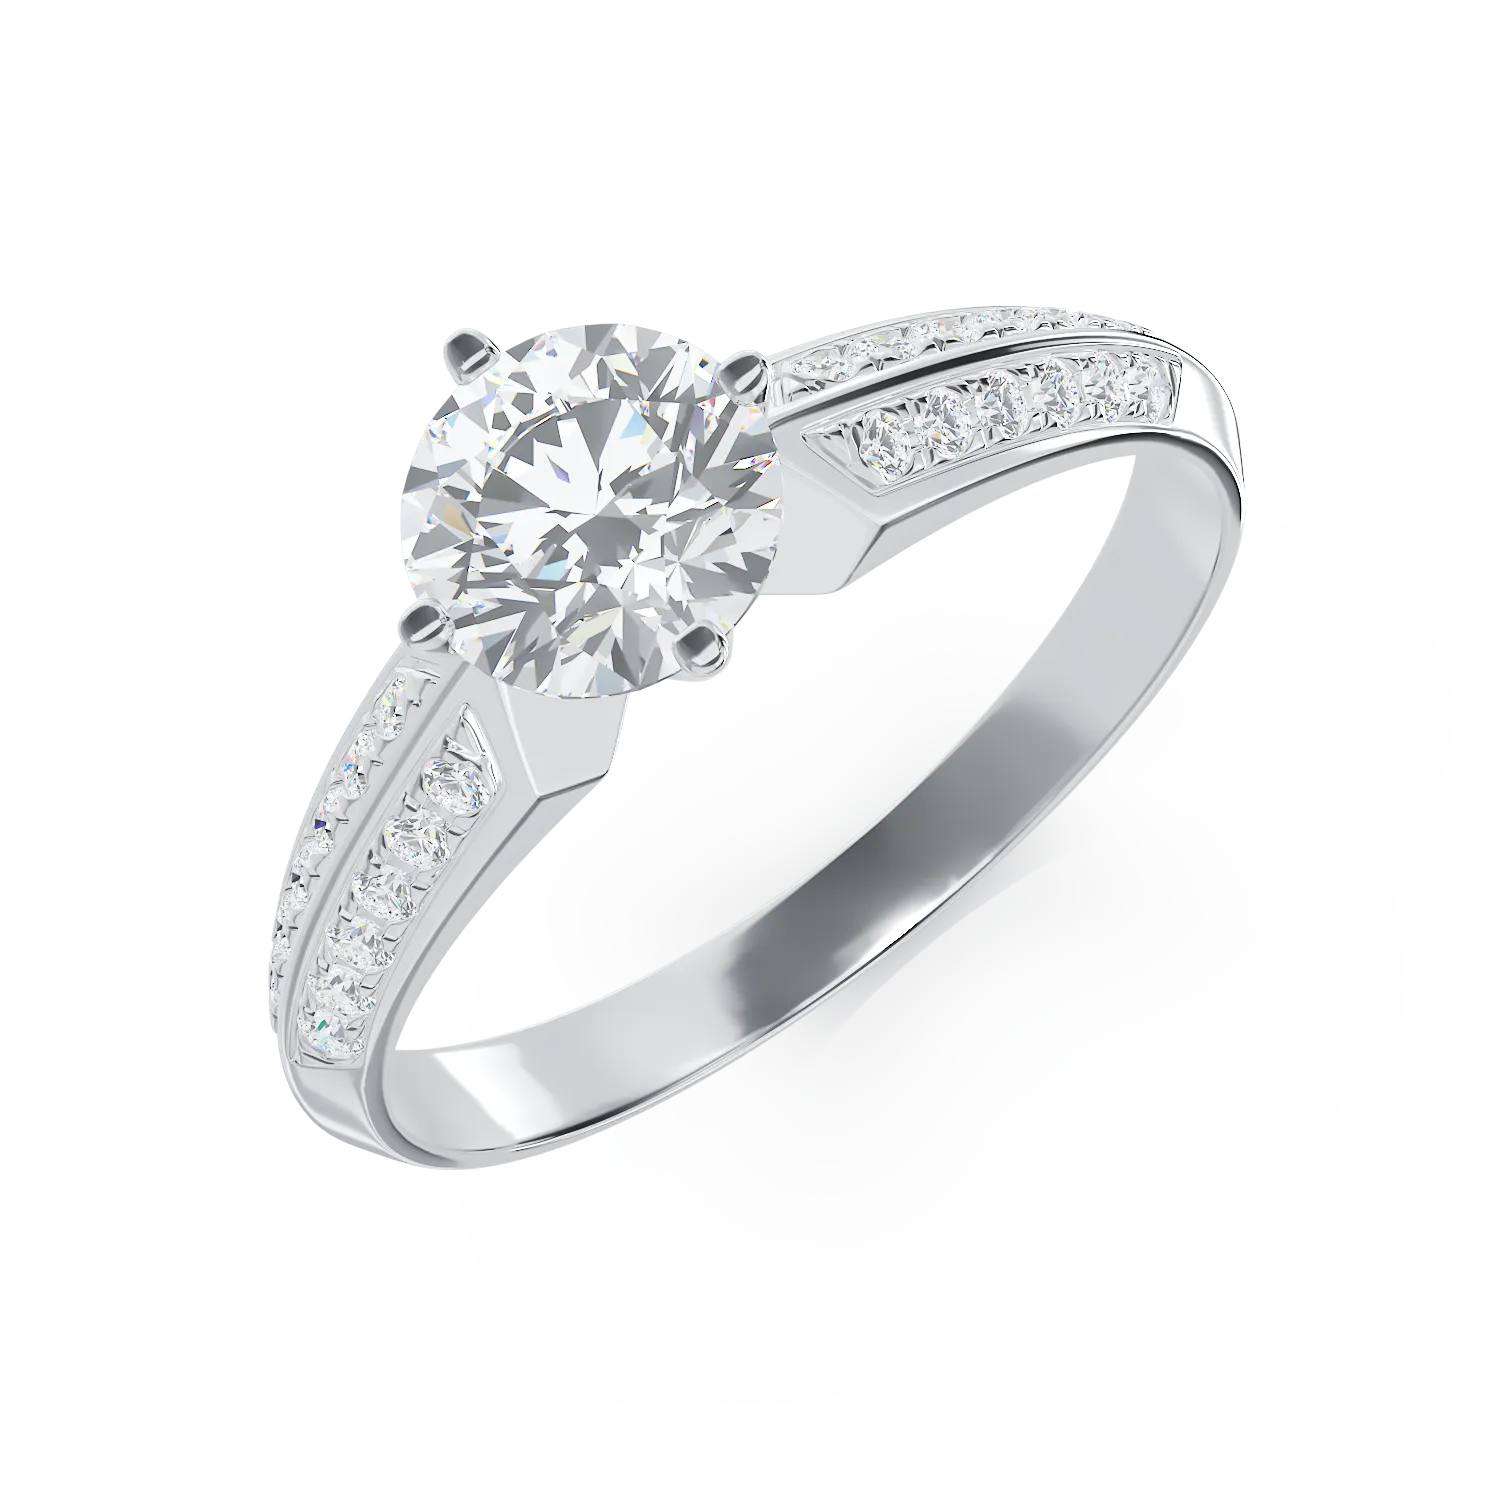 18K white gold engagement ring with 0.59ct diamond and 0.09ct diamonds